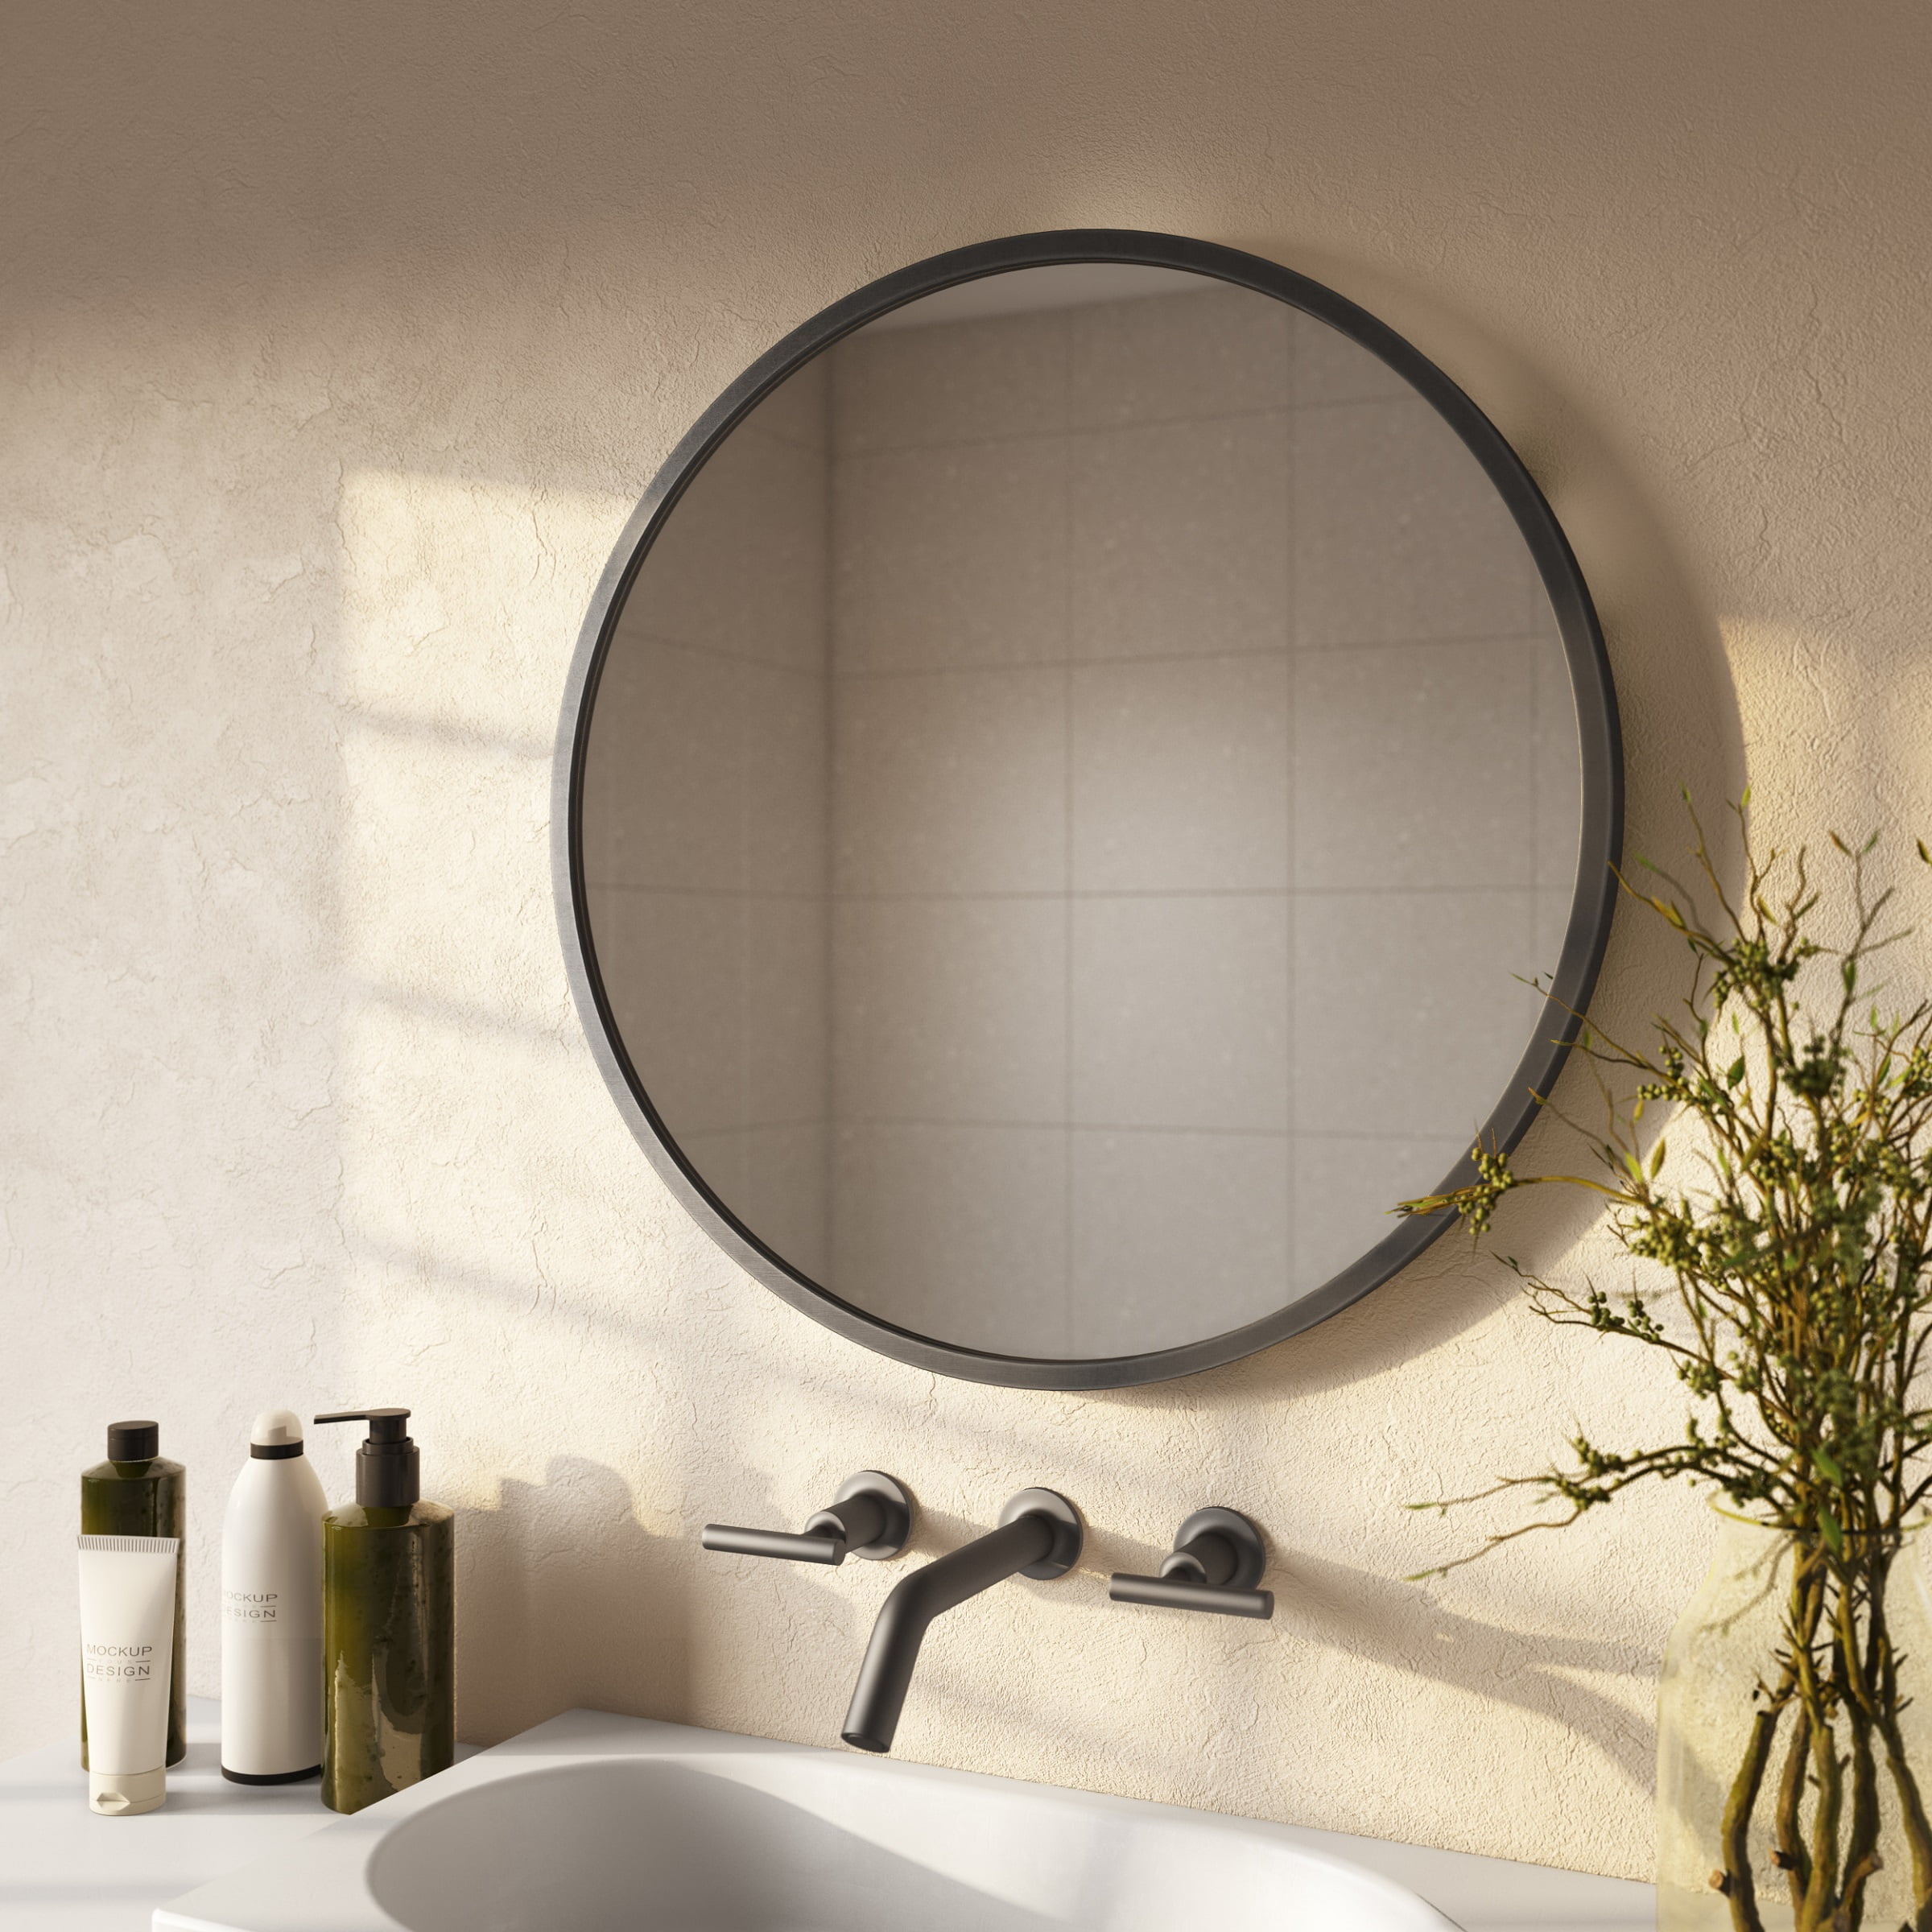 Picture of Aspire Home Accents 7524 Bali Modern Round Wall Mirror, Gray - 24 in.